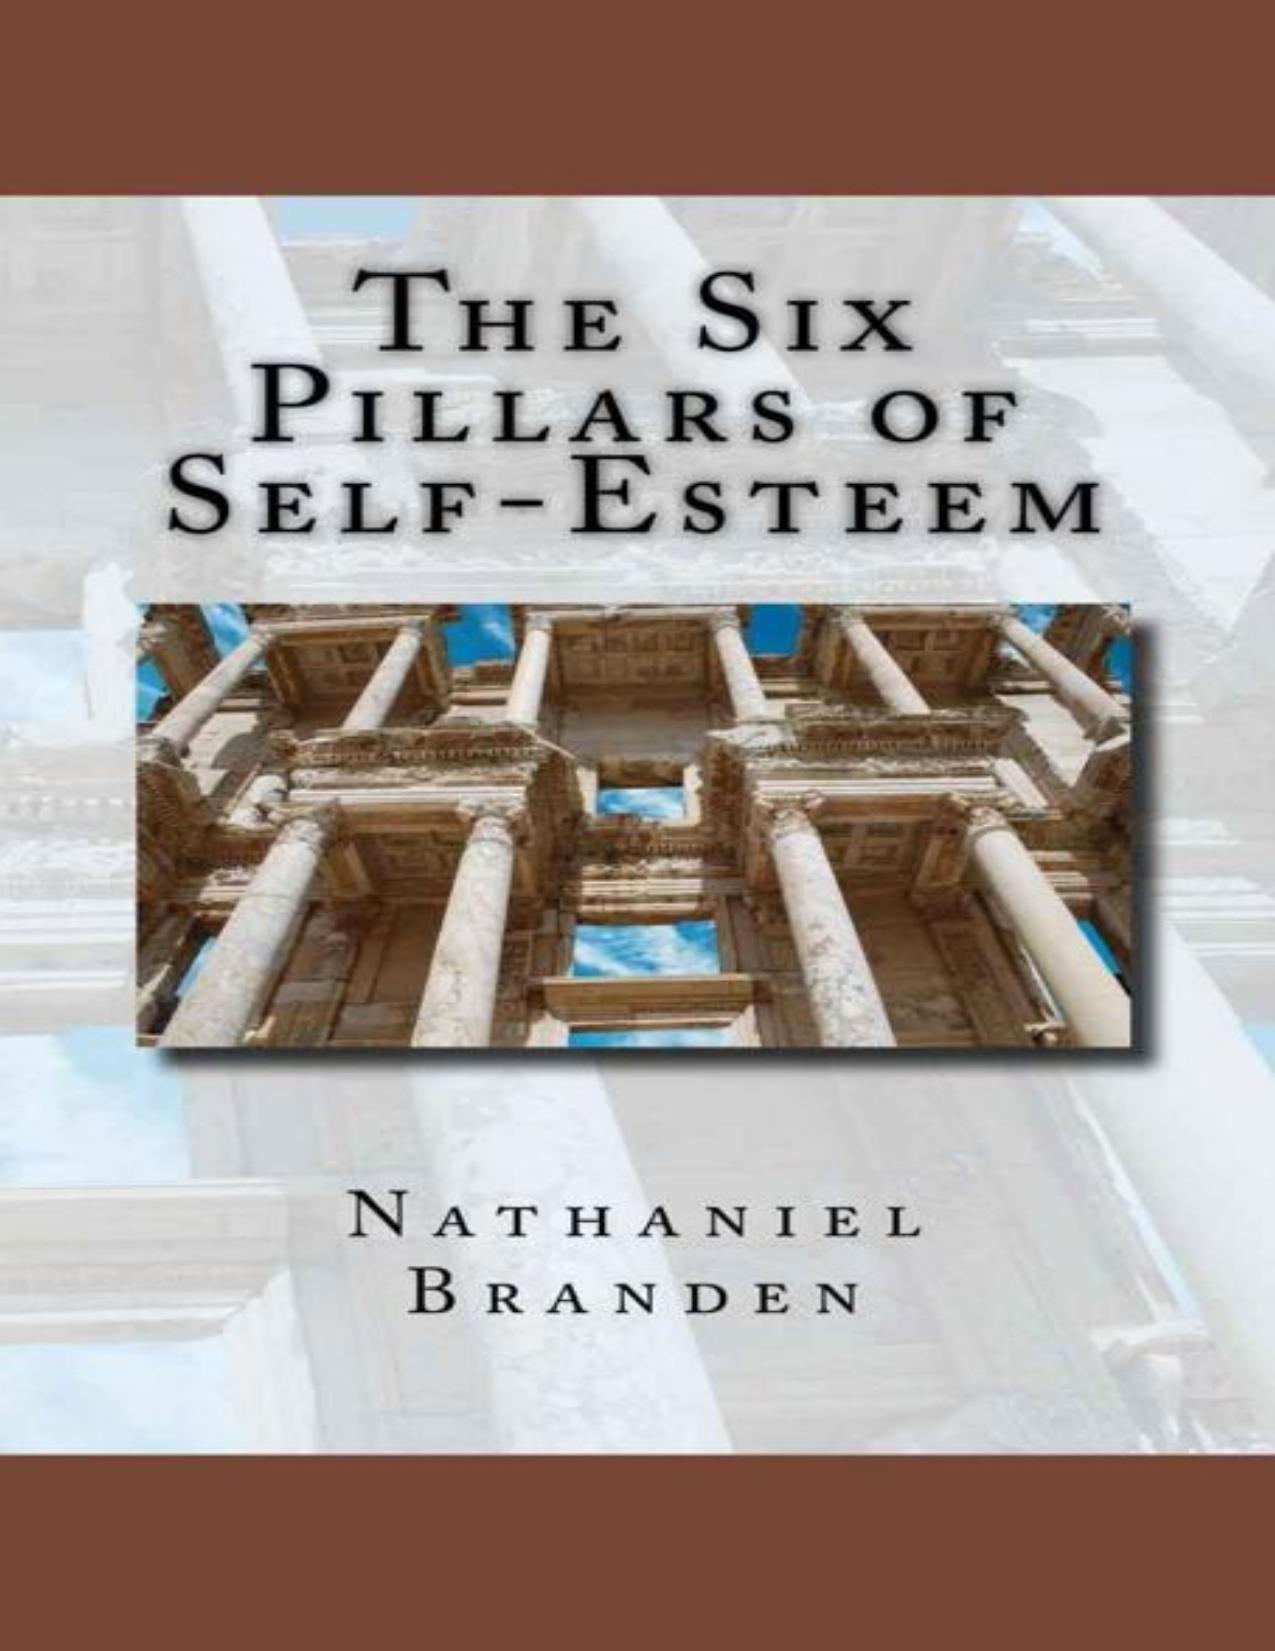 The Six Pillars of Self-Esteem: The Definitive Work on Self-Esteem by the Leading Pioneer in the Field - PDFDrive.com